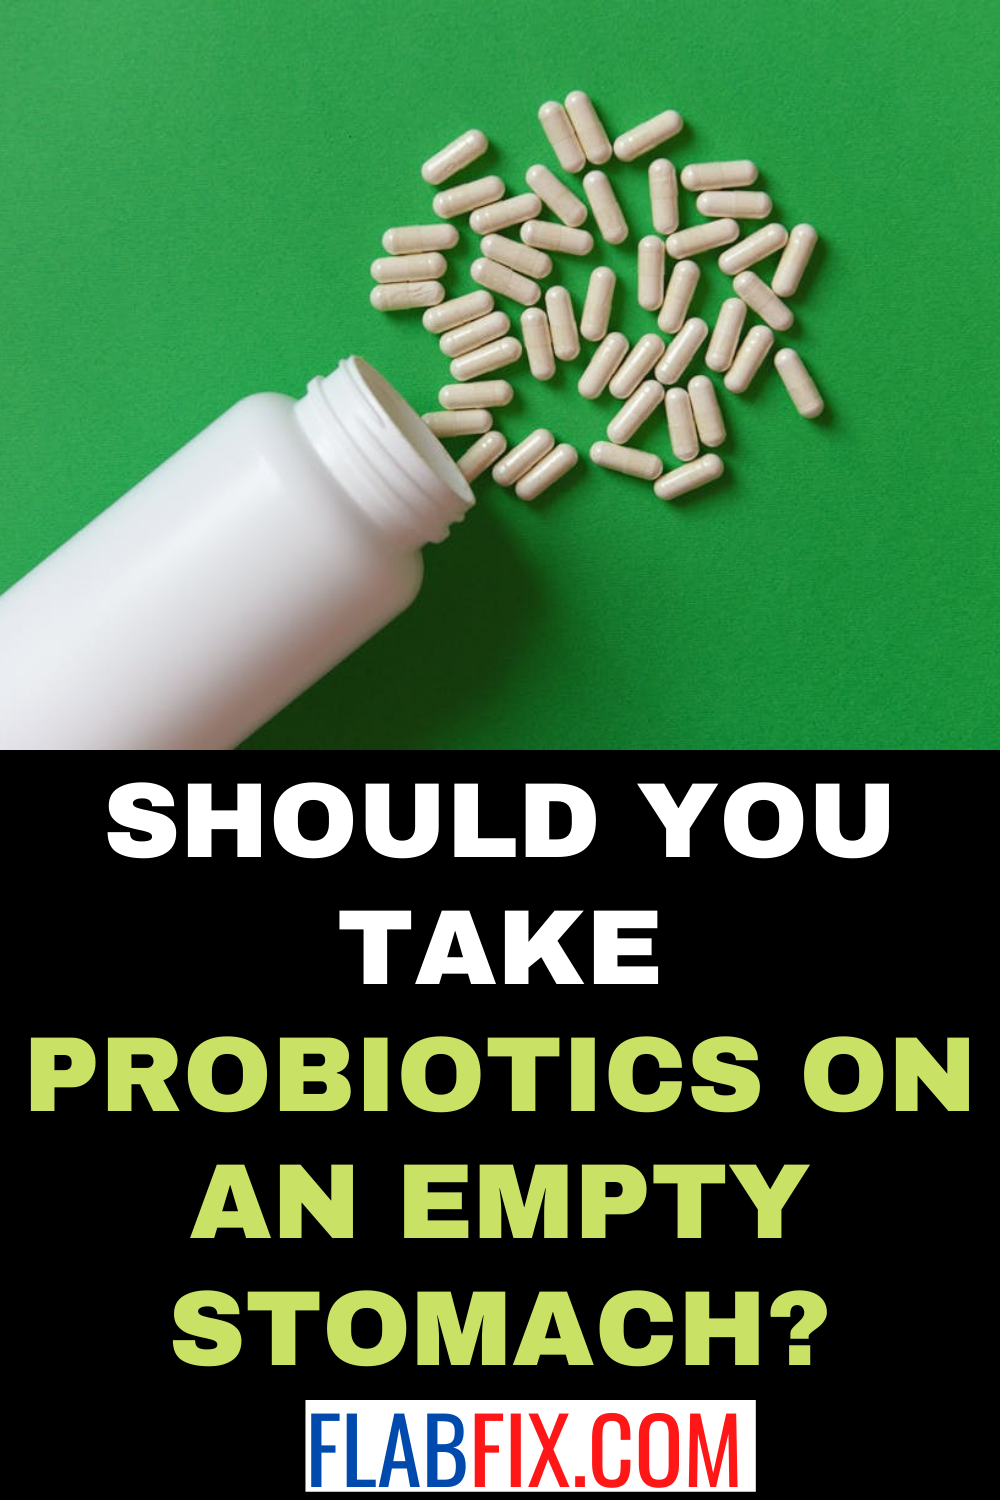 Should You Take Probiotics on an Empty Stomach?